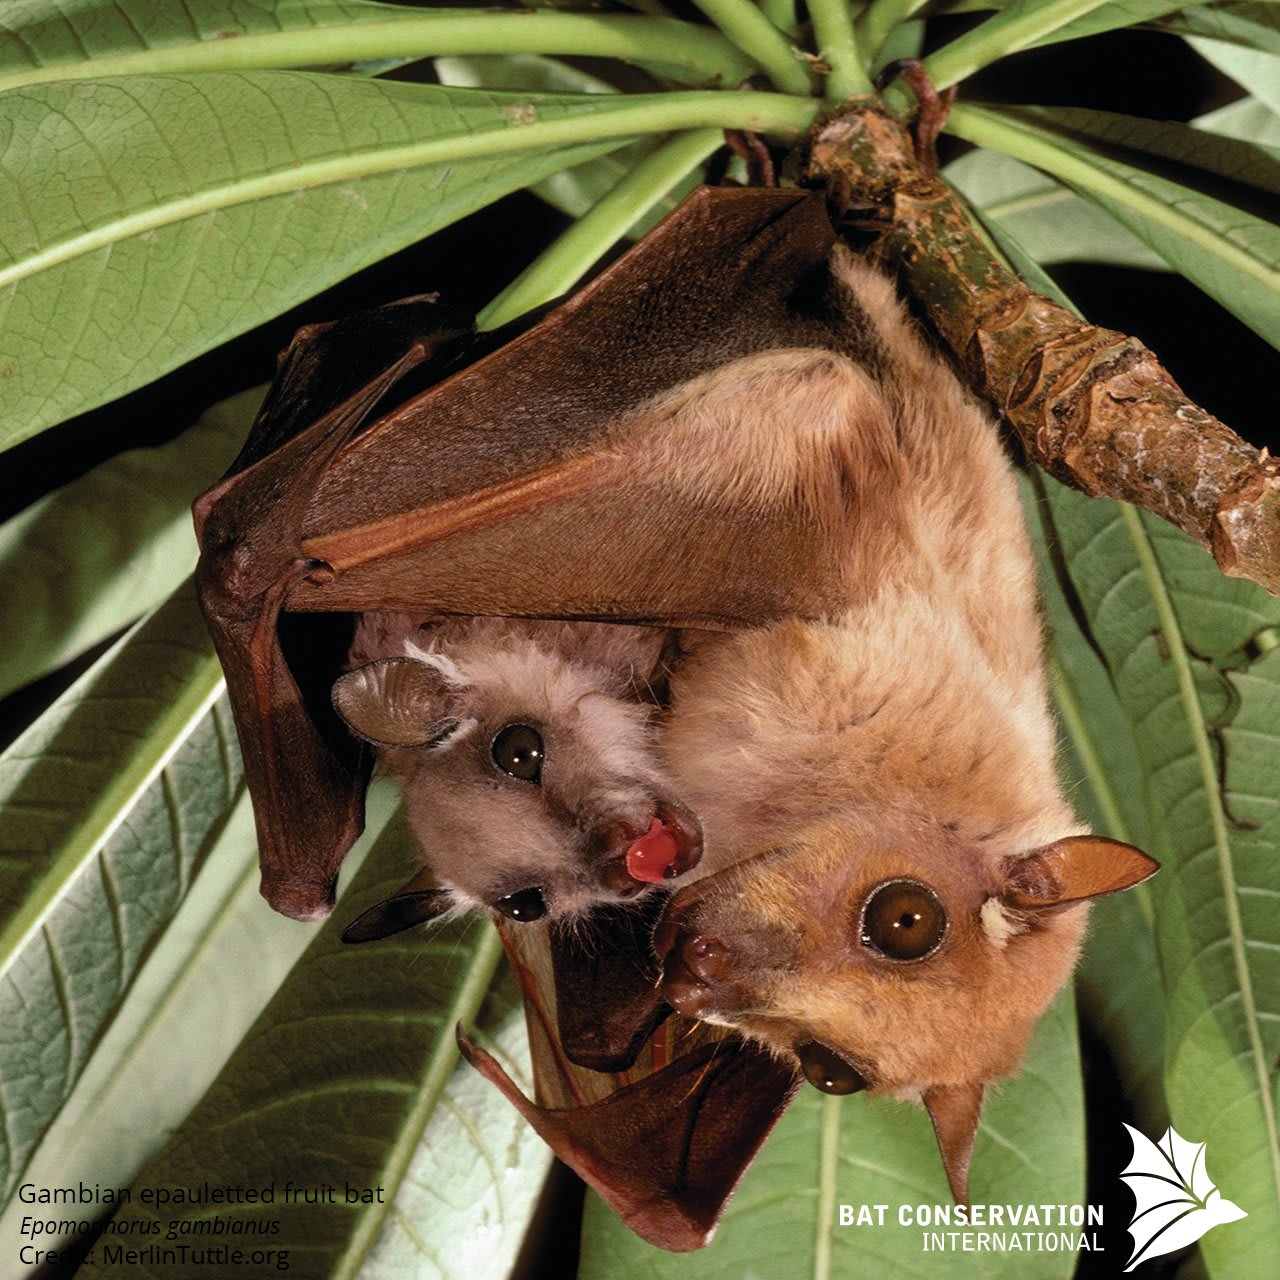 Mother bats speak "baby talk" to their pups. A recent study showed that pup-directed vocalizations of adult females presented a different 'color' and pitch than the calls directed towards other adult bats. Male bats communicated with the pups to transmit the "vocal signature" of their social group.